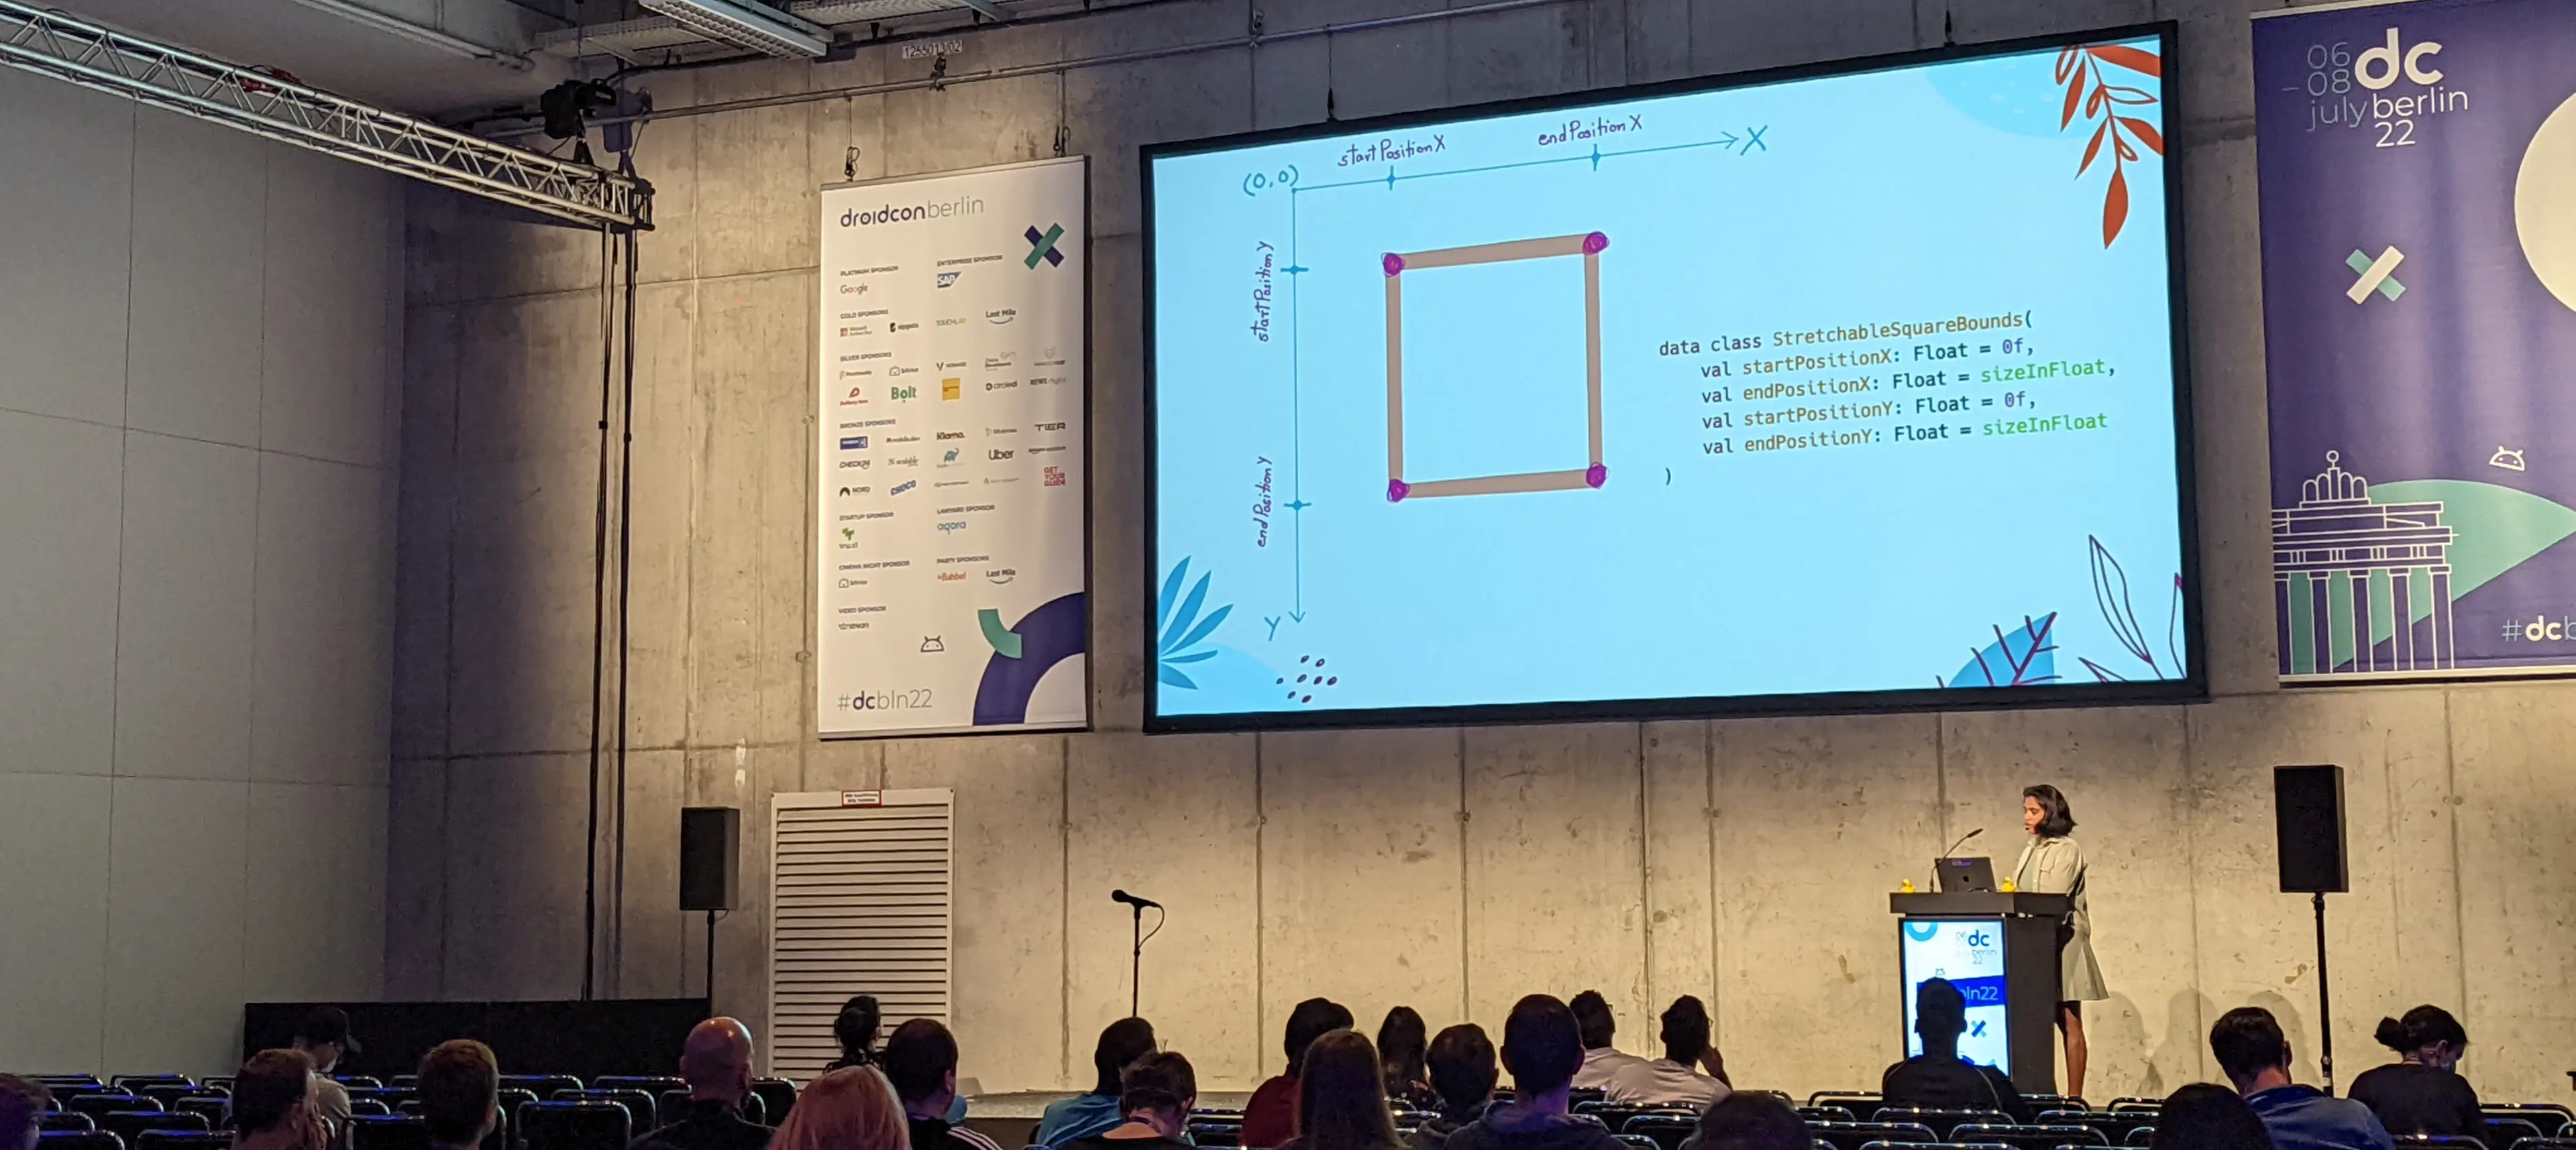 Kinnera teaches us how to build cool animations with Jetpack Compose at Droidcon 2022